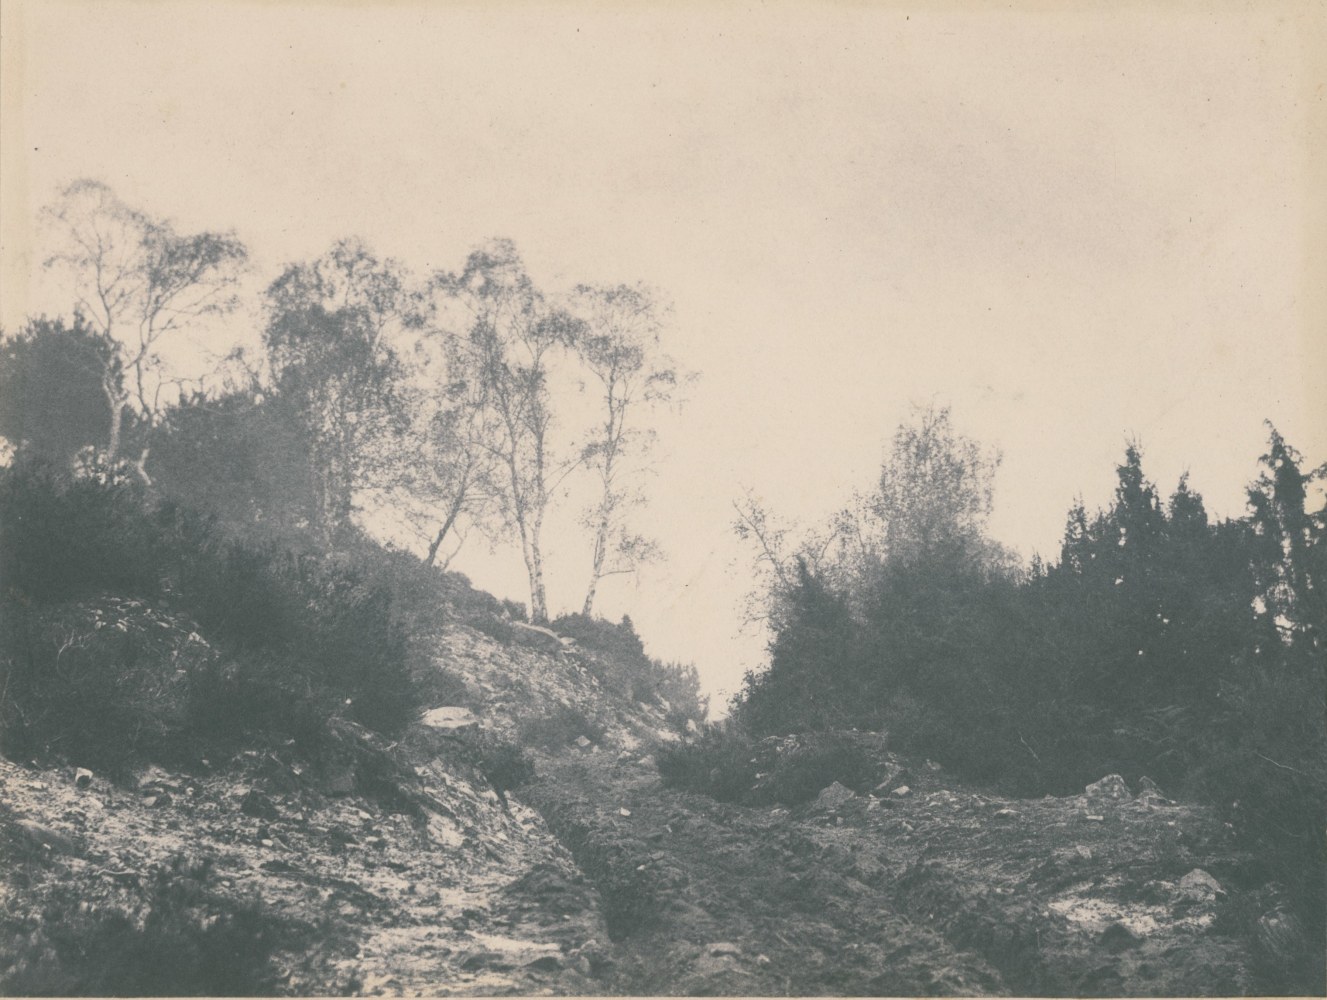 Eugène CUVELIER (French, 1837-1900) Pathway in the Forest of Fontainebleau*, October 1862 Salt print from a paper negative 19.8 x 25.8 cm, ruled in pencil, mounted on 39.5 x 52.2 cm paper Numbered &quot;N. 168&quot; and dated &quot;8br 62&quot; in pencil on mount